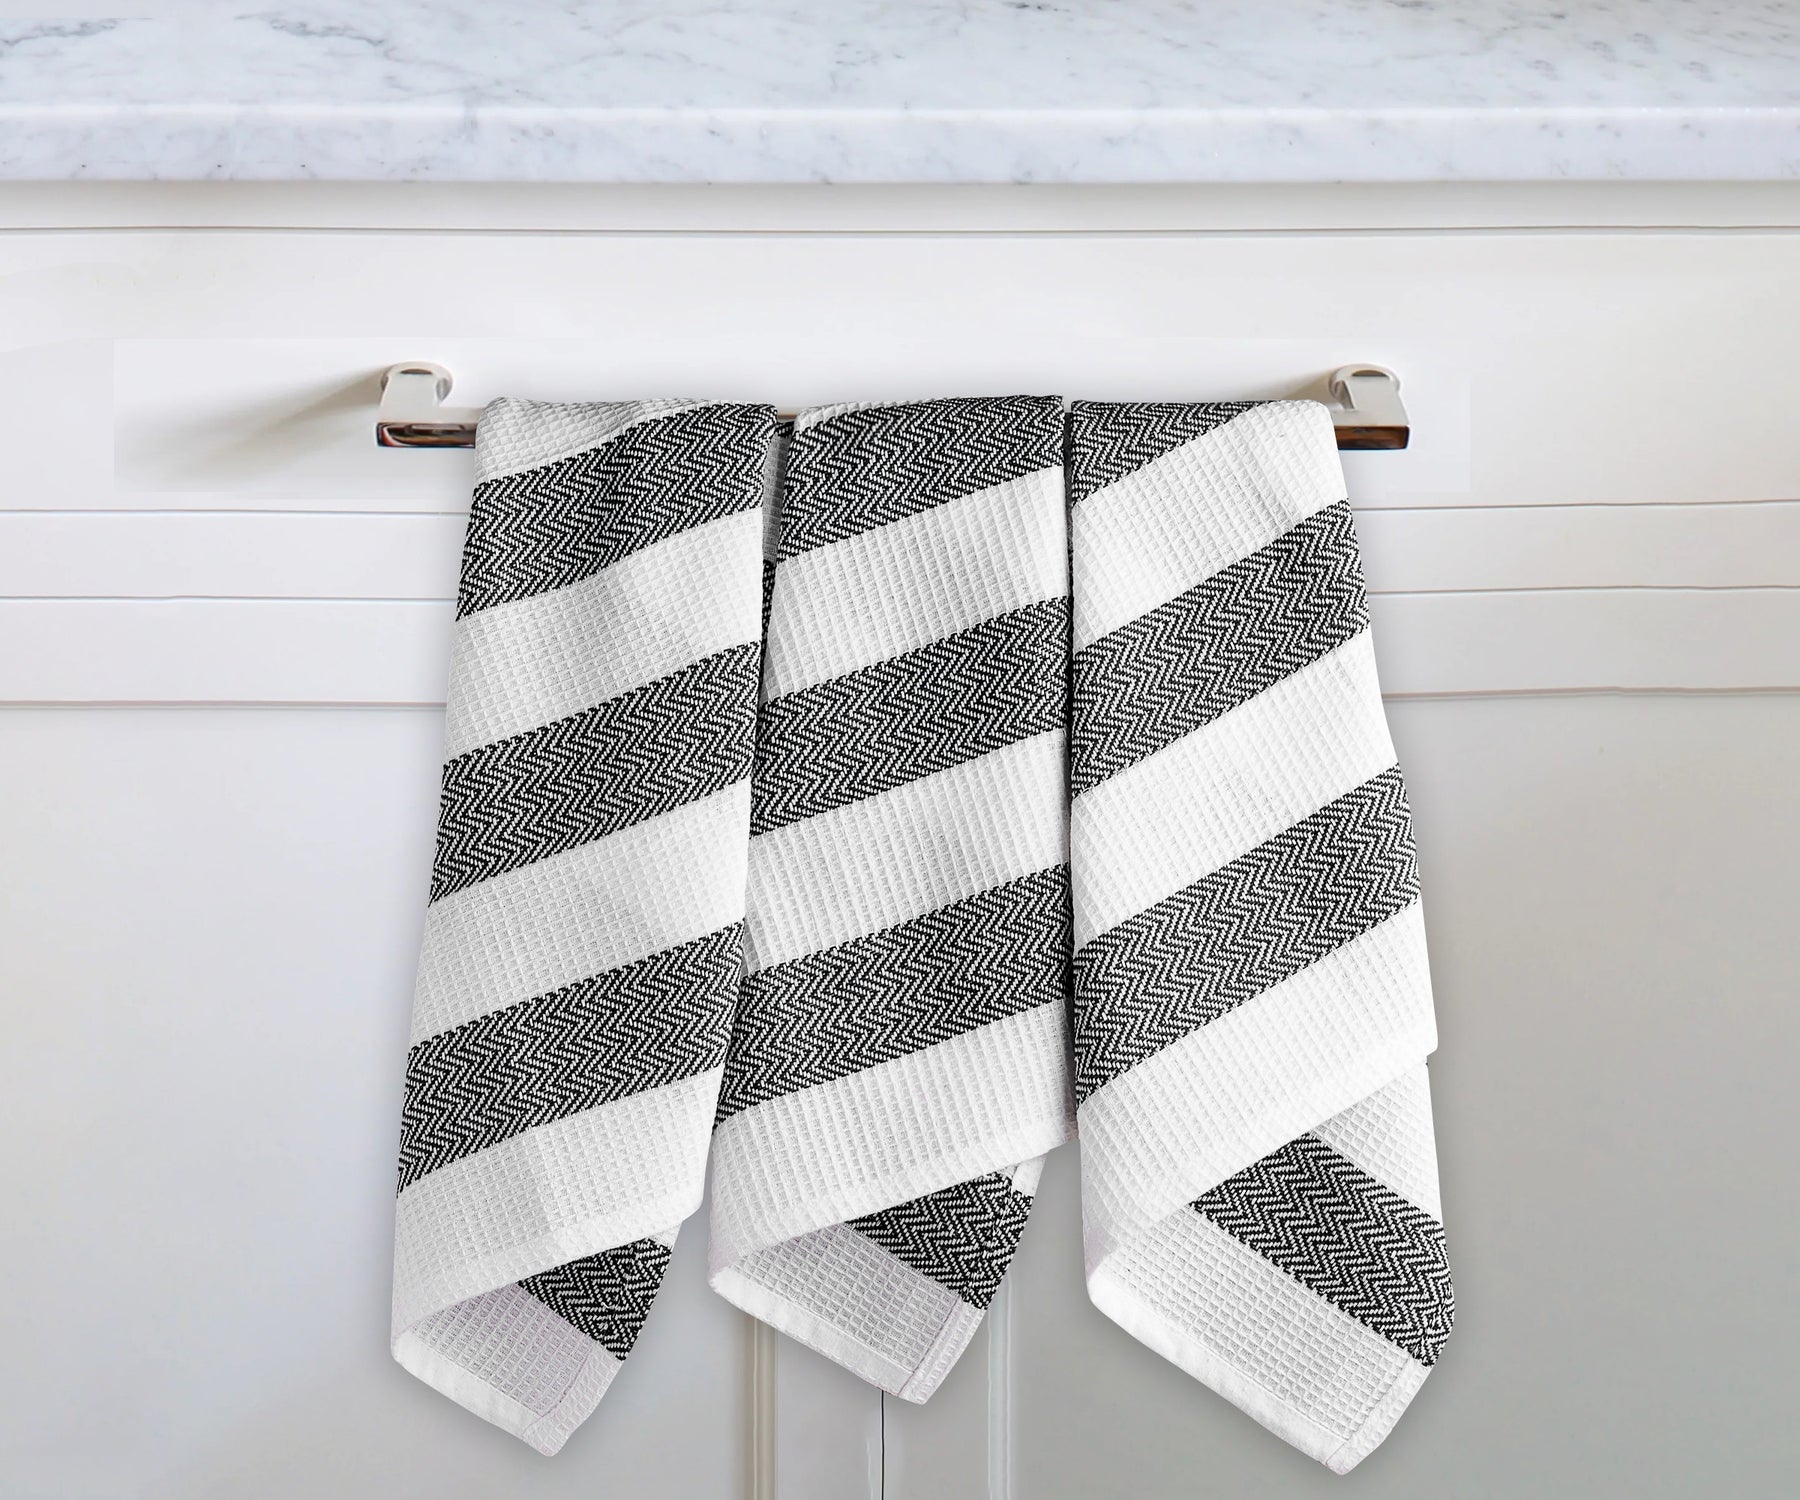 Hand towels for the kitchen, handy for cooking and cleaning.